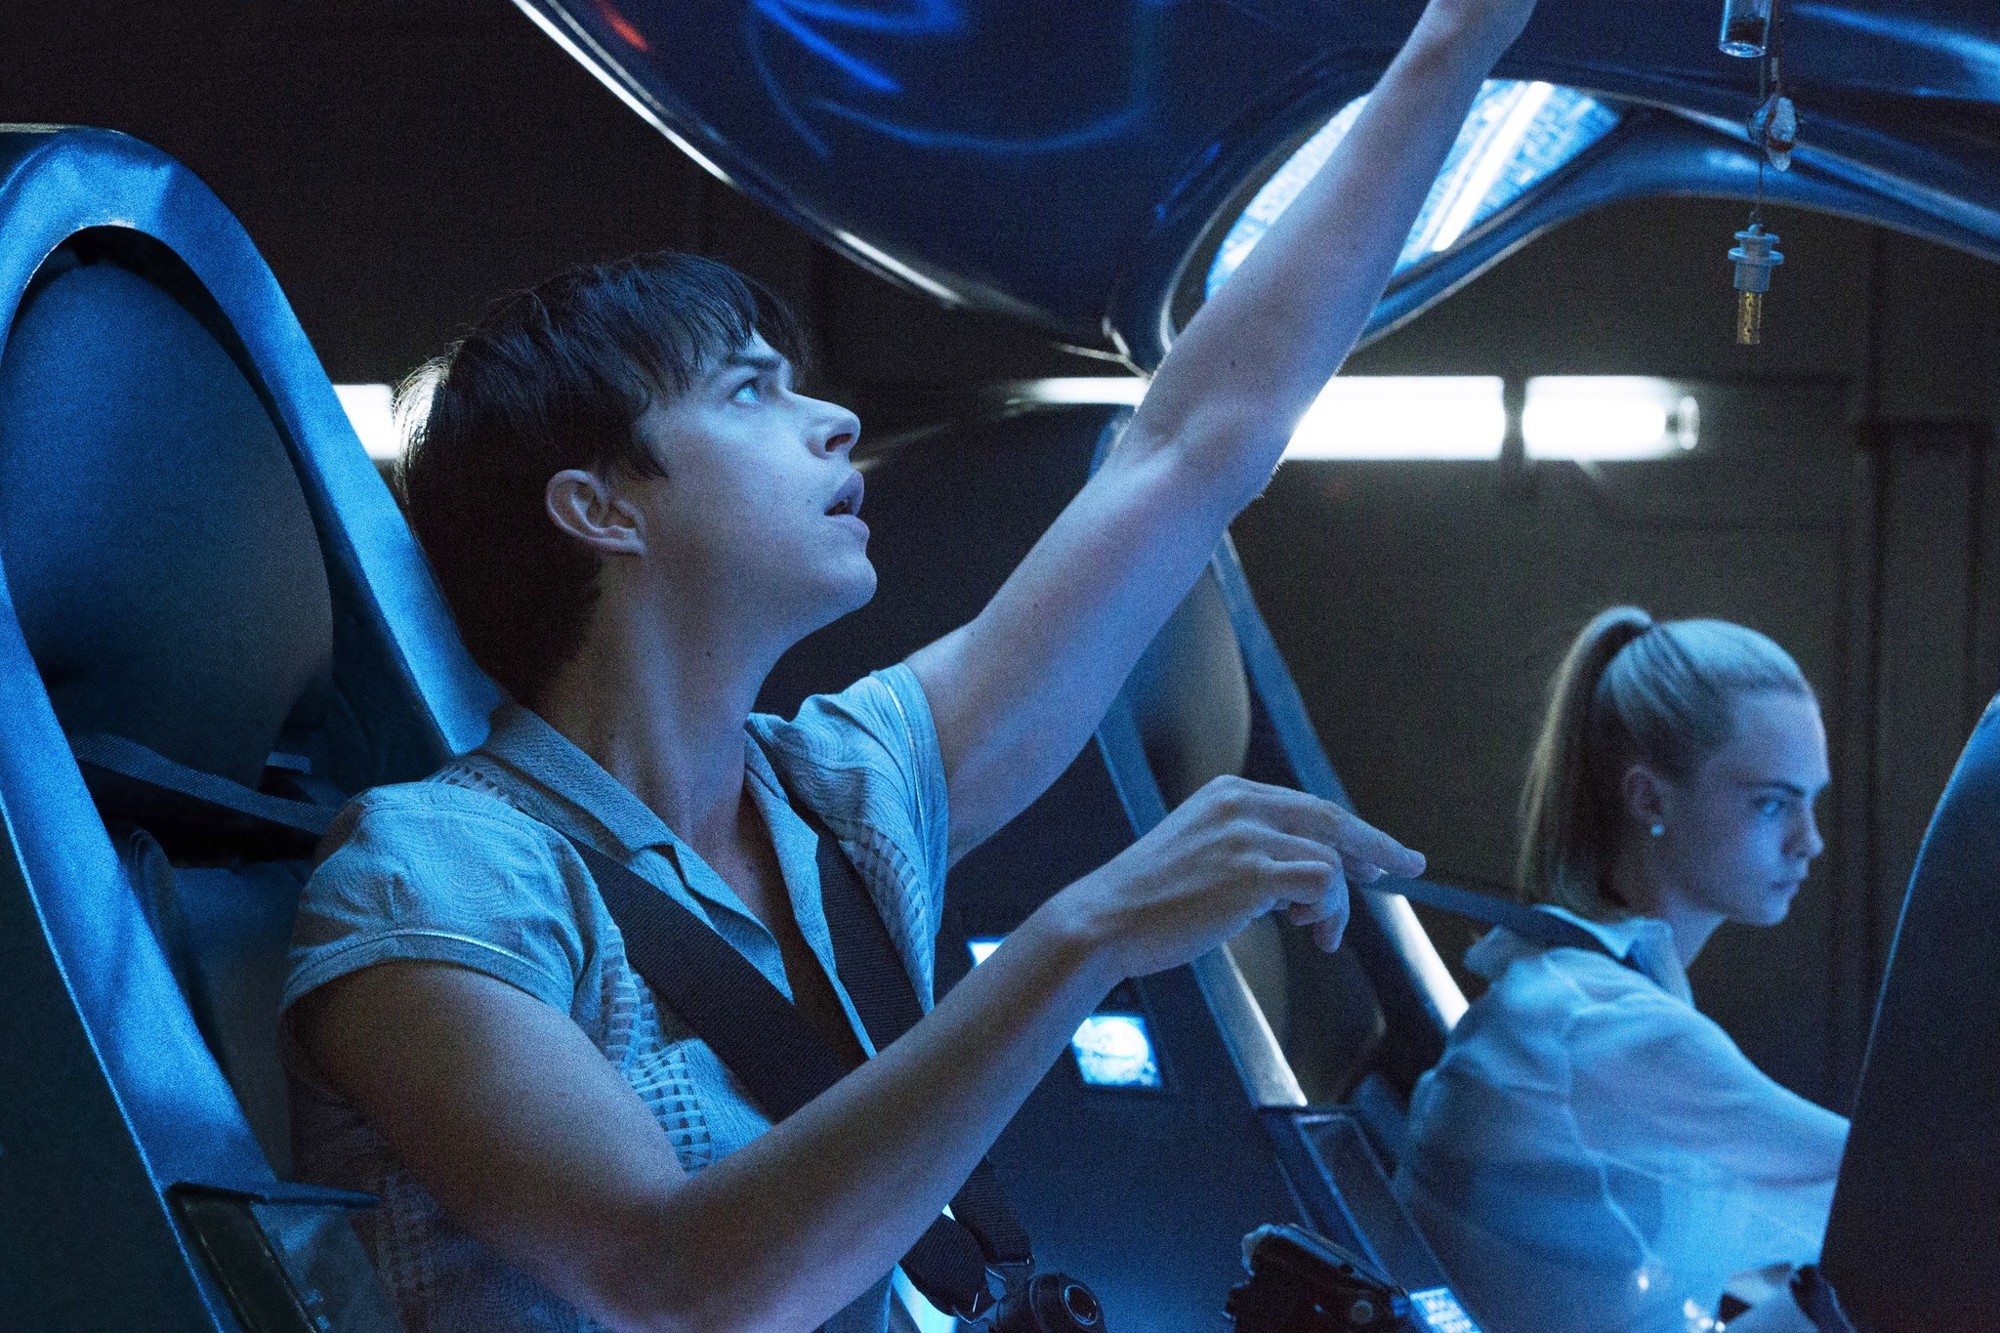 Dane DeHaan stars as Valerian and Cara Delevingne stars as Laureline in STX Entertainment's Valerian and the City of a Thousand Planets (2107)